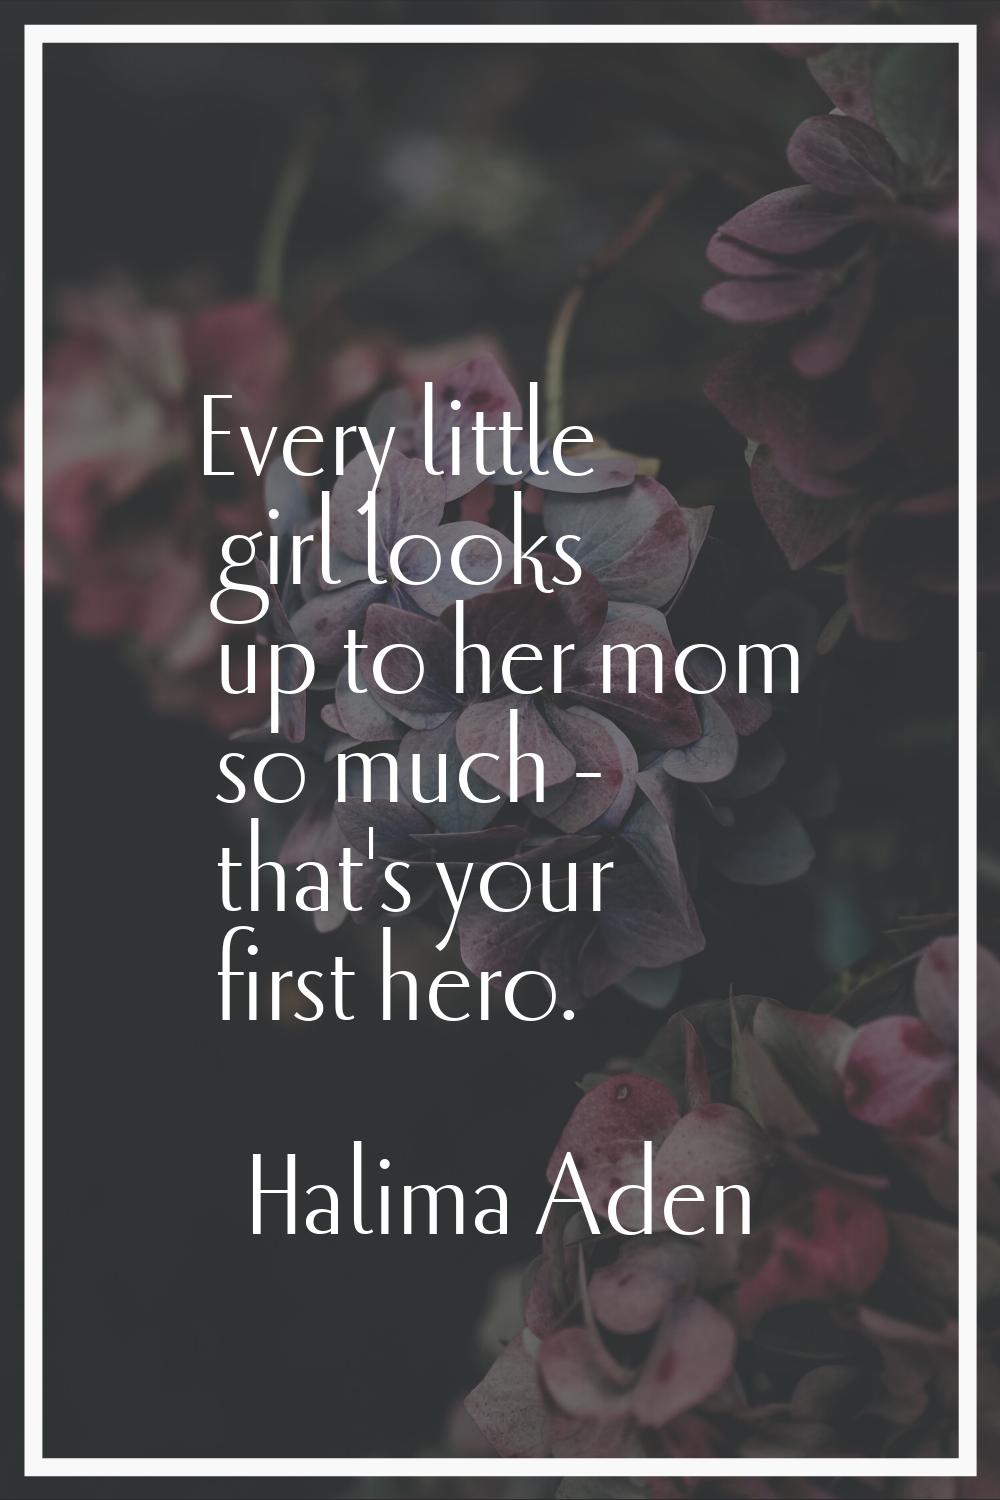 Every little girl looks up to her mom so much - that's your first hero.